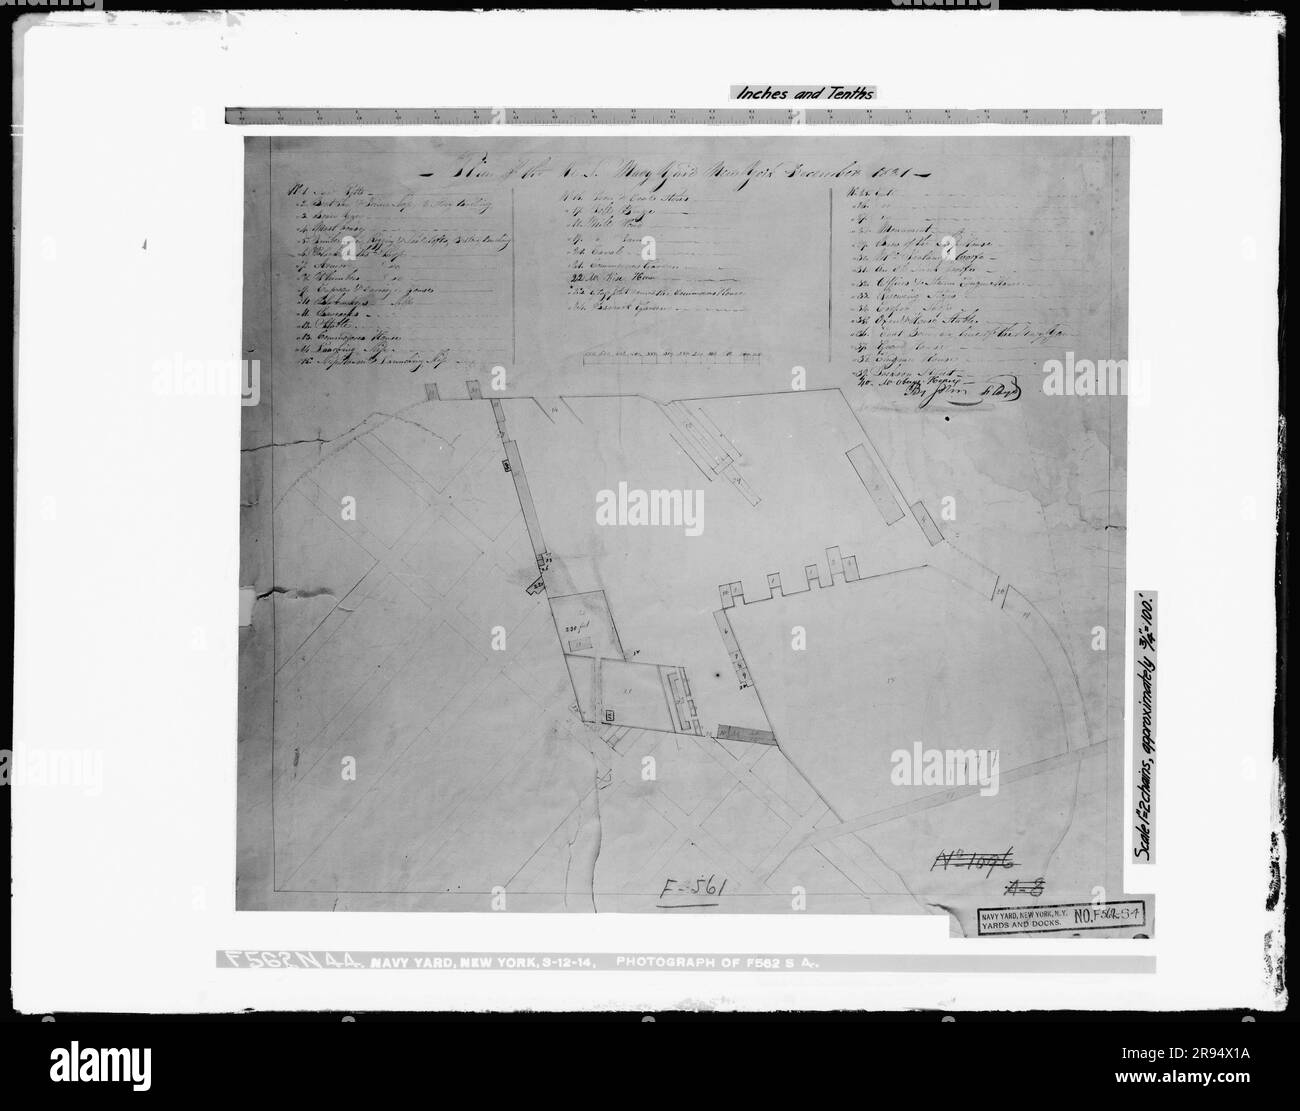 Photograph of File Drawing F562 S4. Glass Plate Negatives of the Construction and Repair of Buildings, Facilities, and Vessels at the New York Navy Yard. Stock Photo